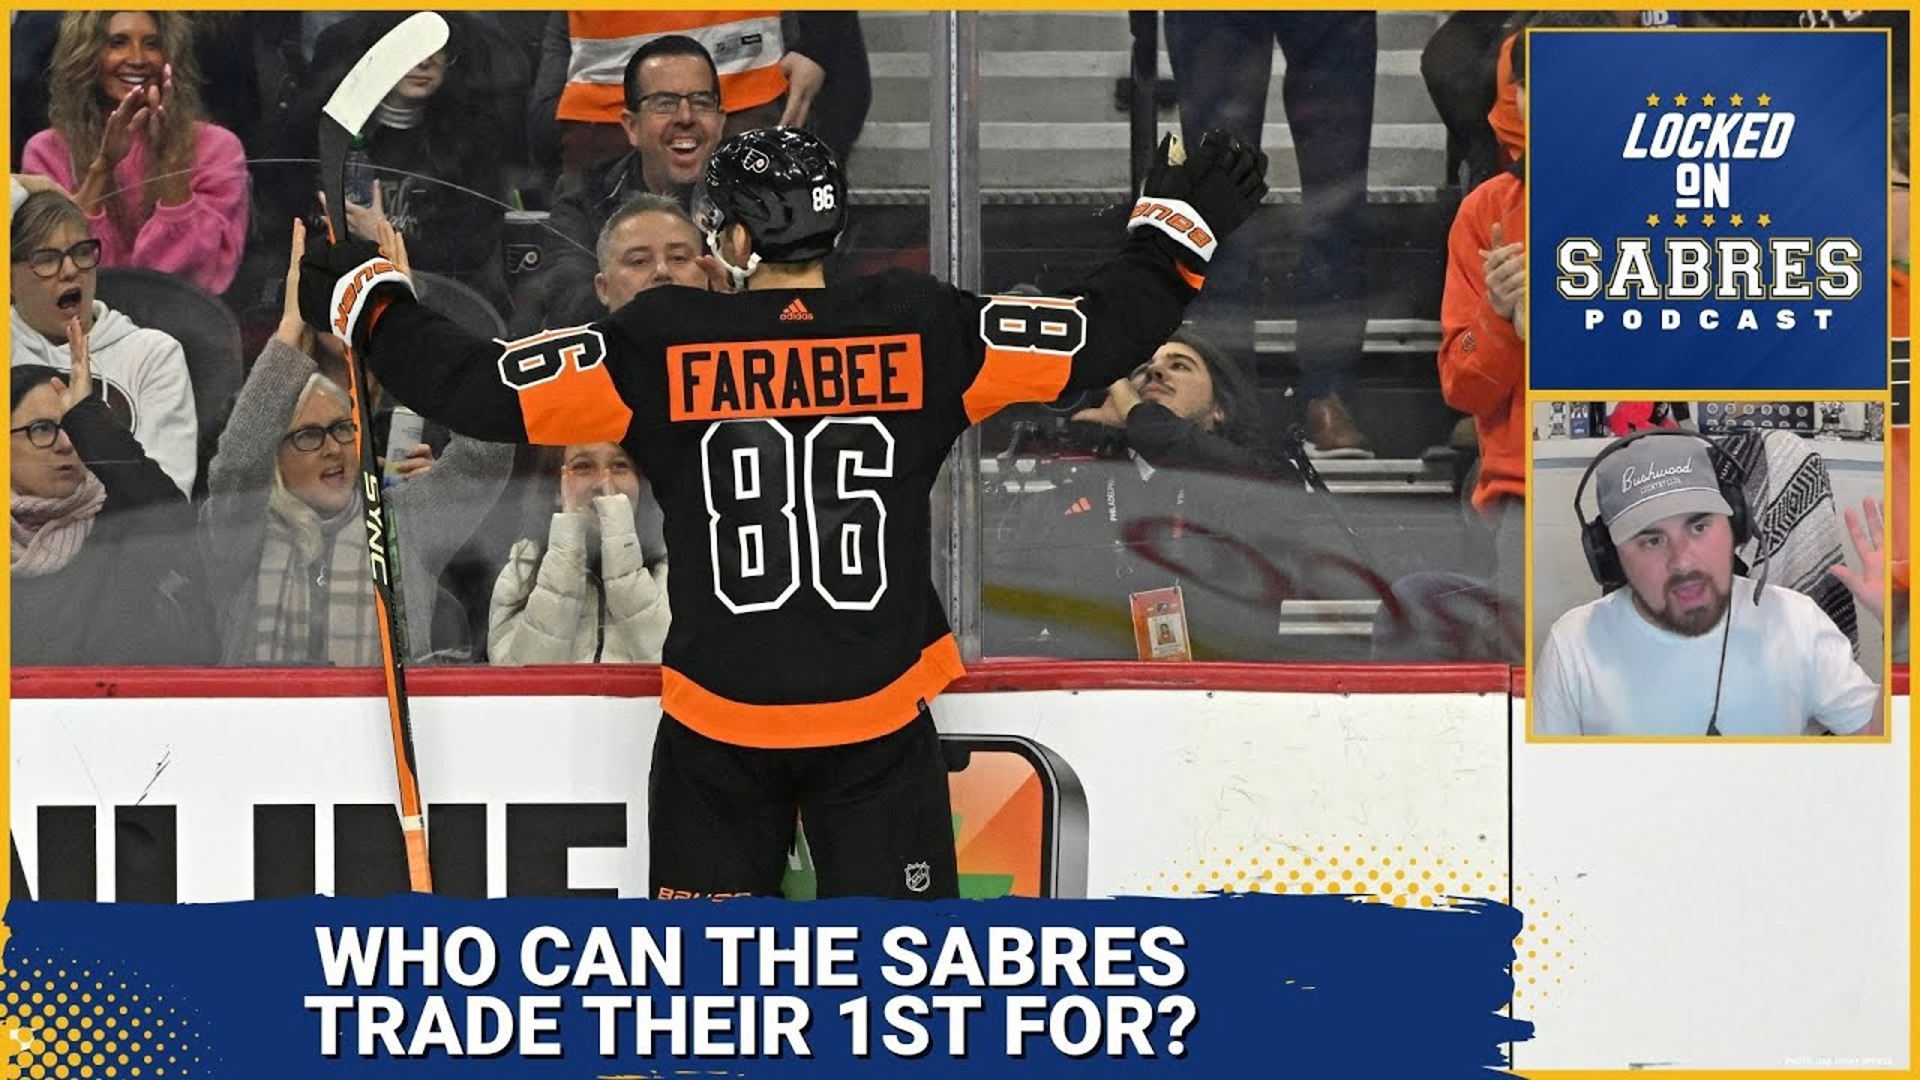 Who the Sabres could get by trading their first round pick